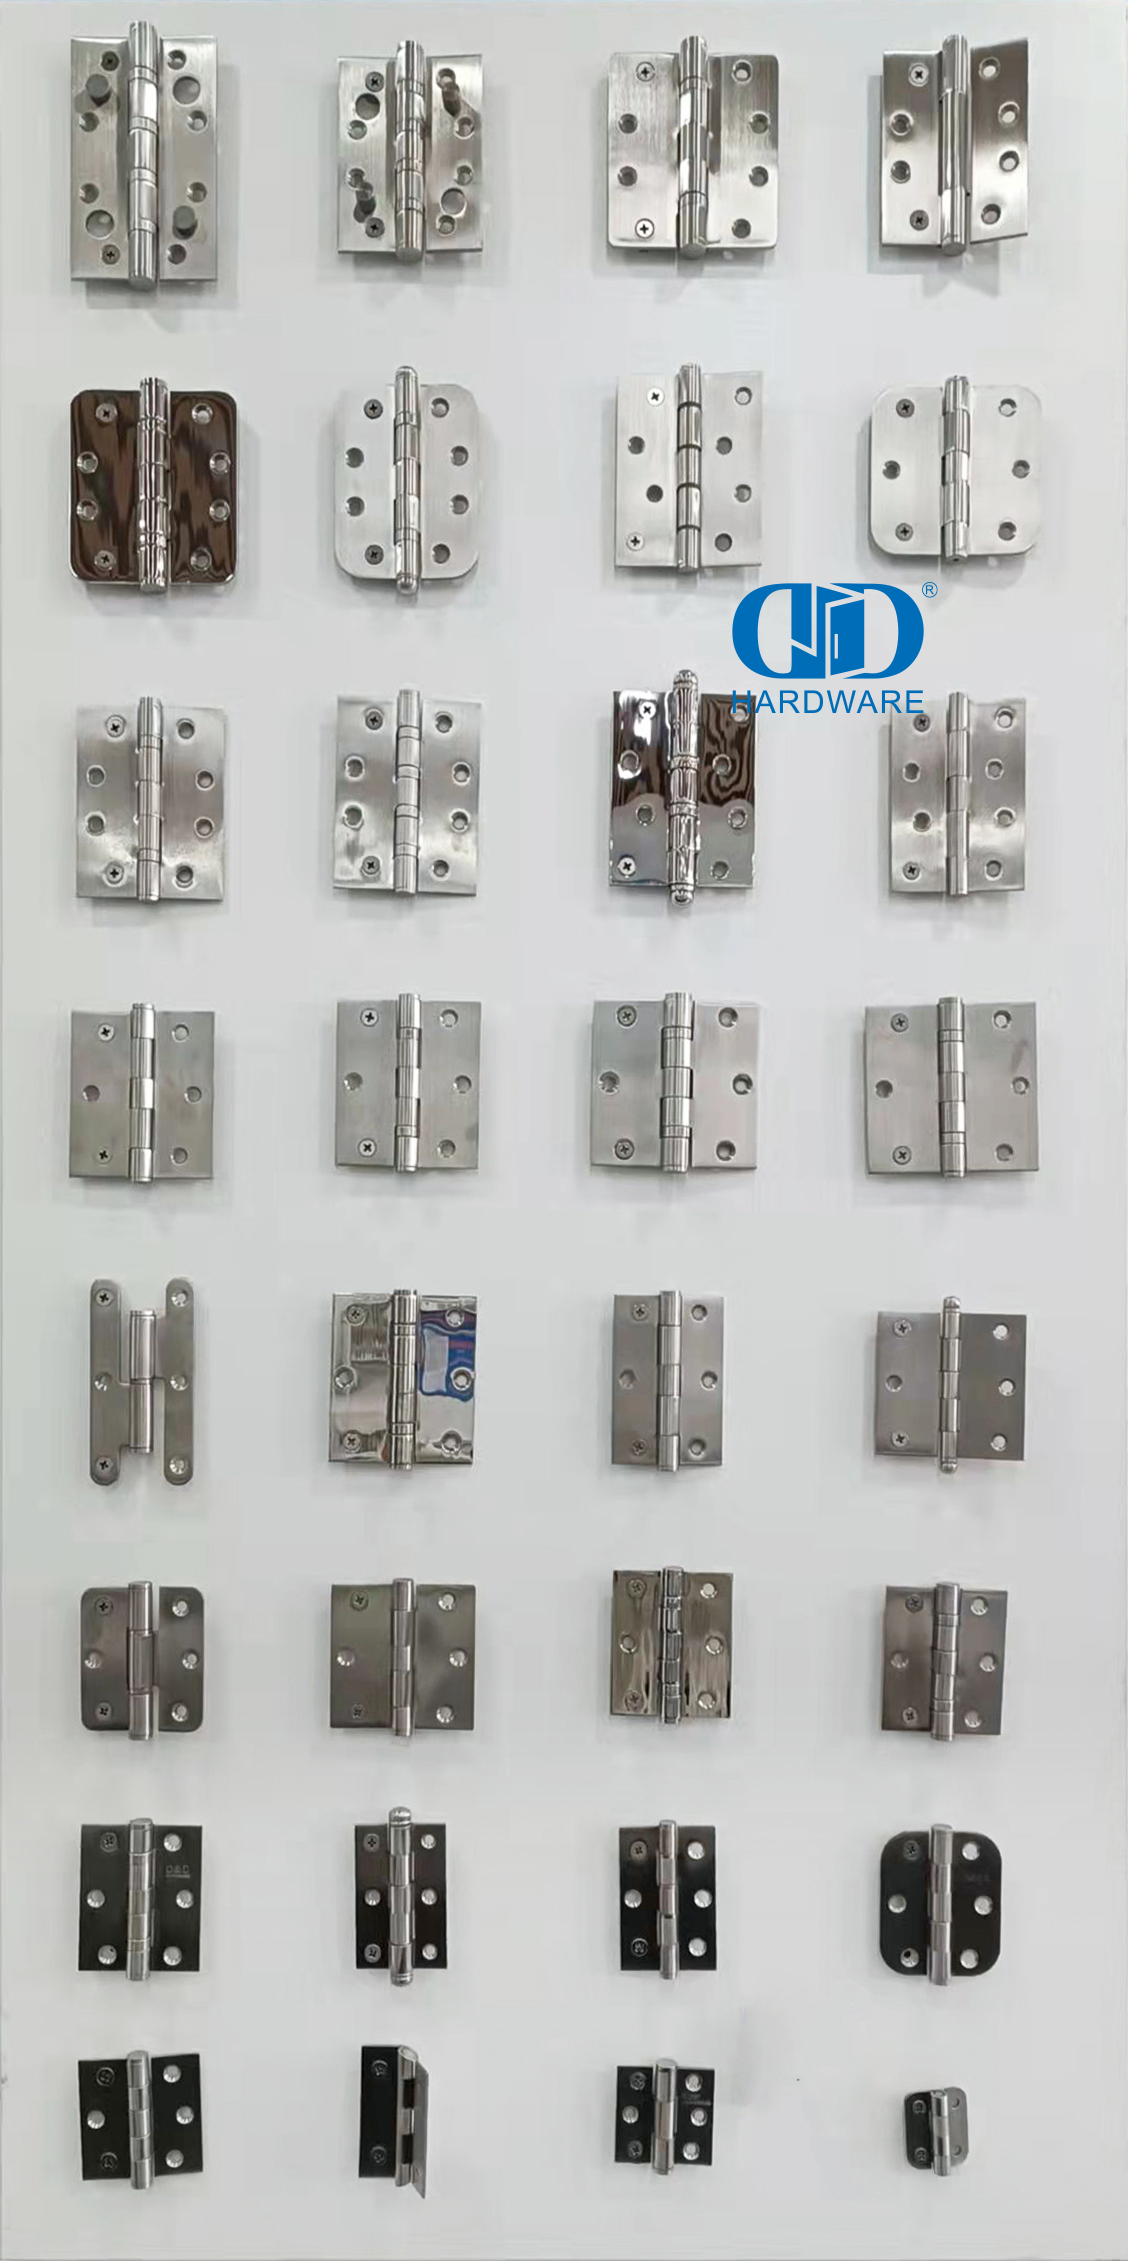 Safety and Good Price Stainless Steel Rivet Tip Door Hinge -DDSS005